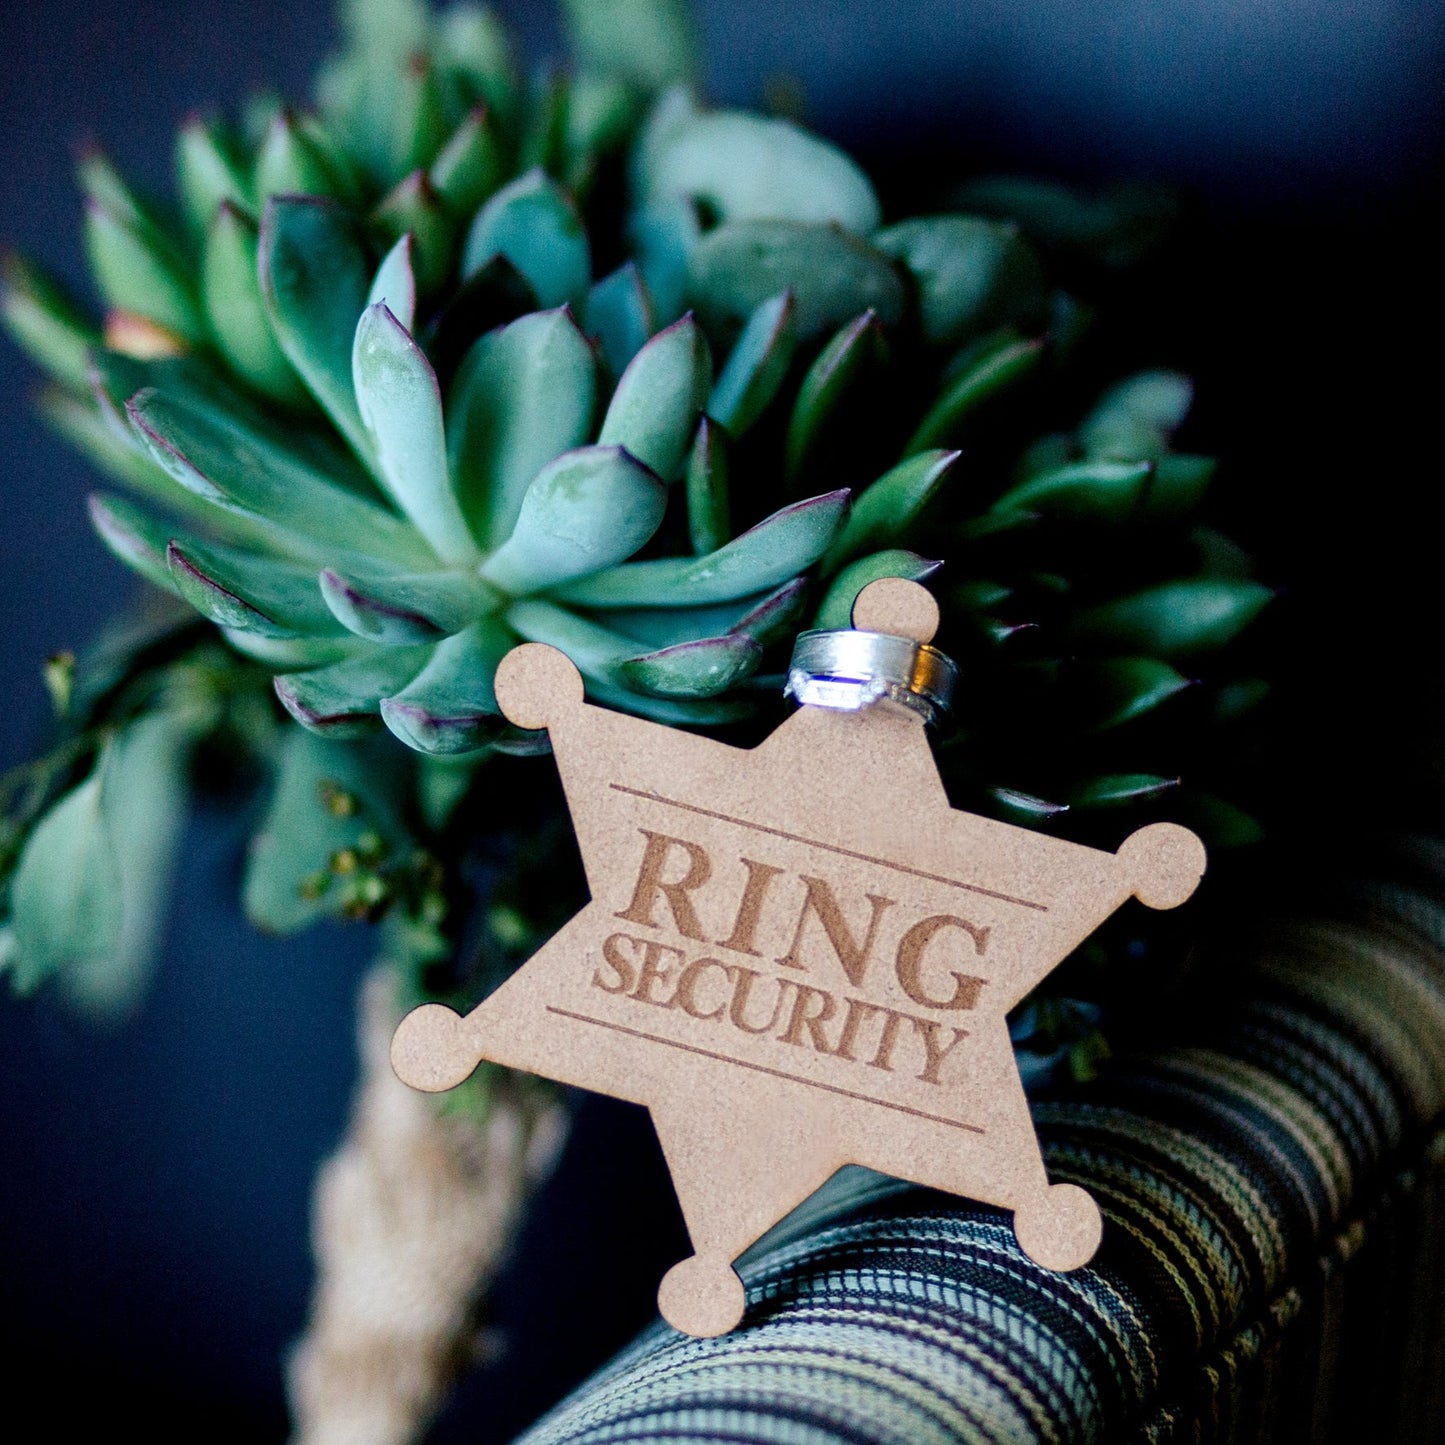 "Ring Security" Wooden Ring Bearer Badge